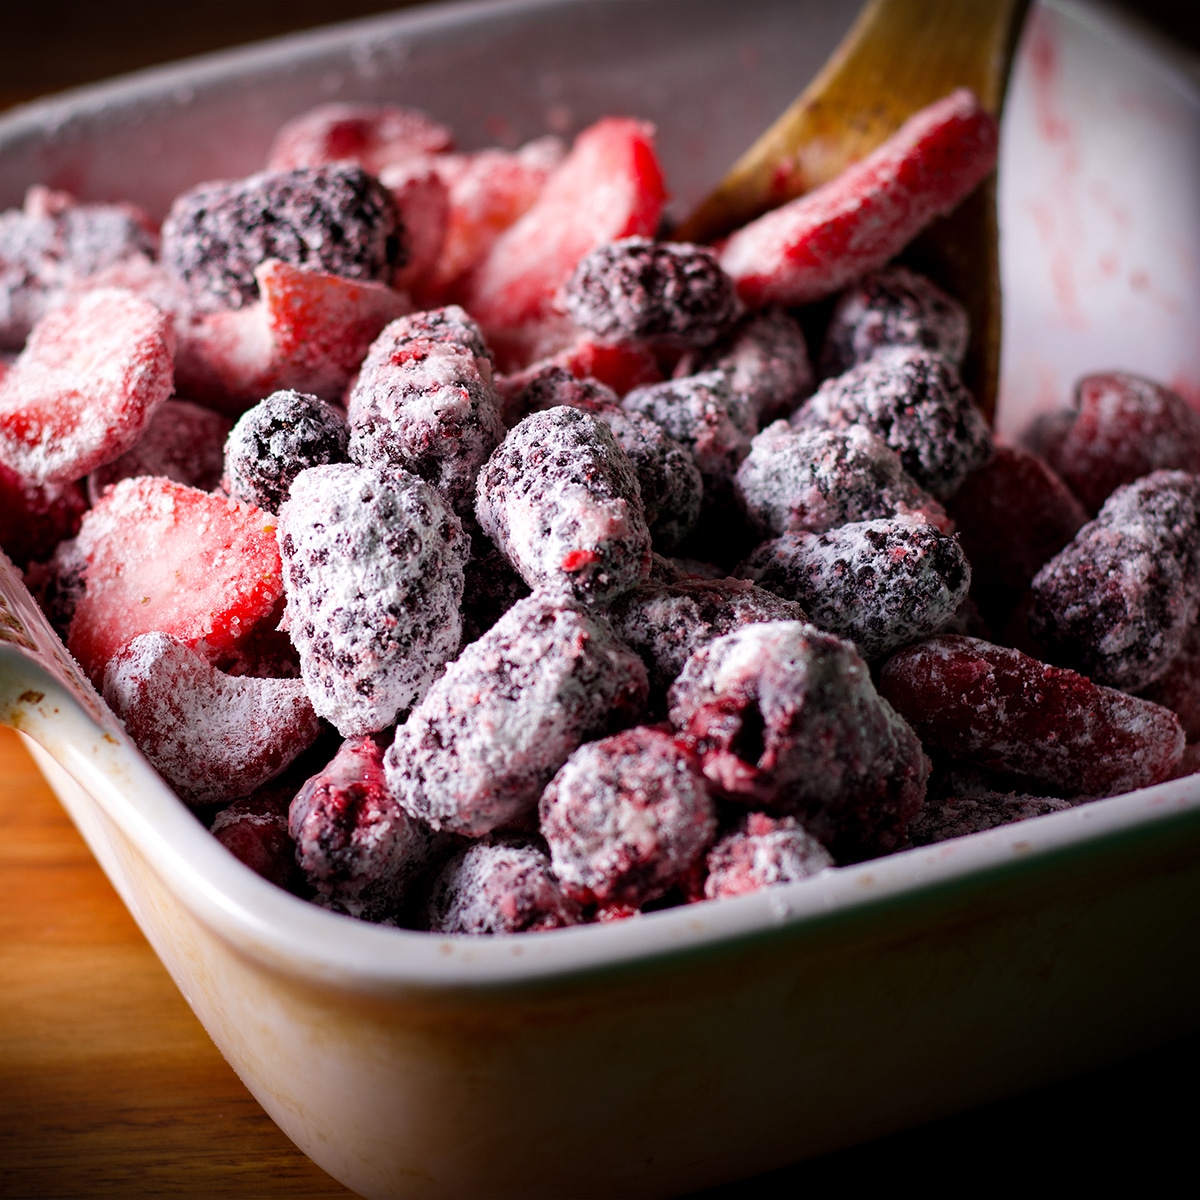 Using a wooden spoon to mix the berry topping for berry cobbler in a white baking dish.